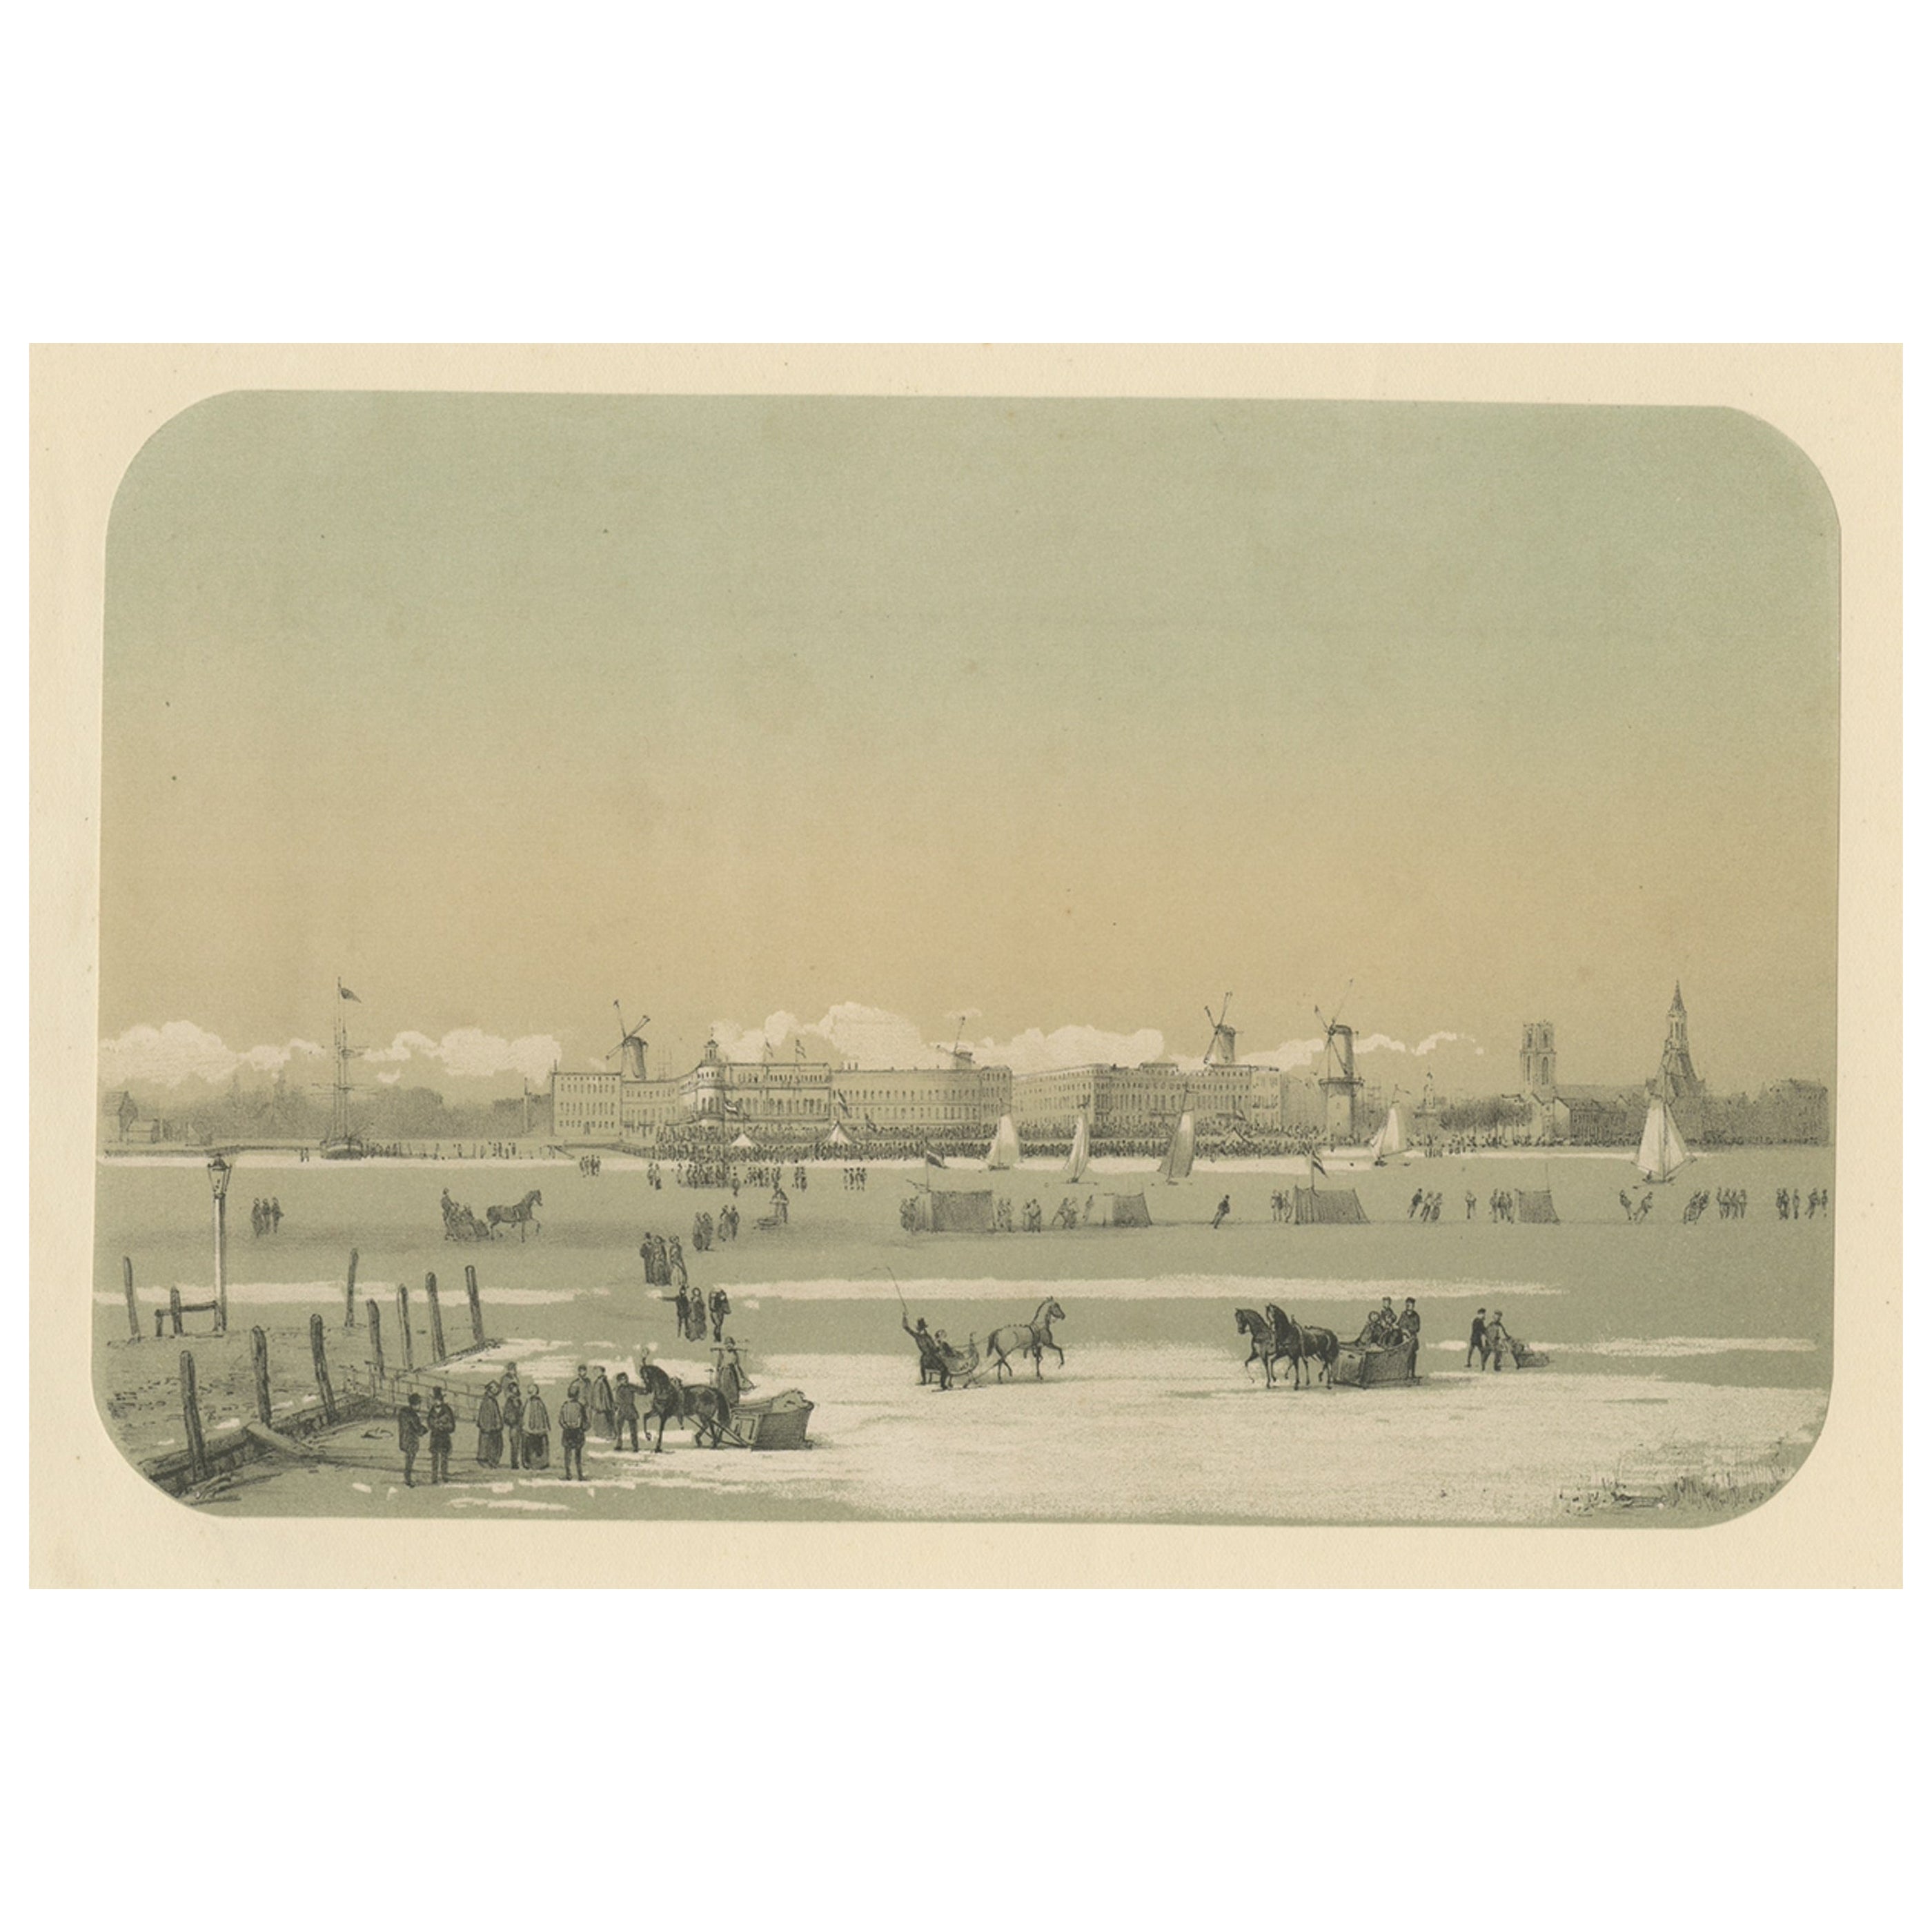 Ice Skating Activities Near Katendrecht and Rotterdam, The Netherlands, 1855